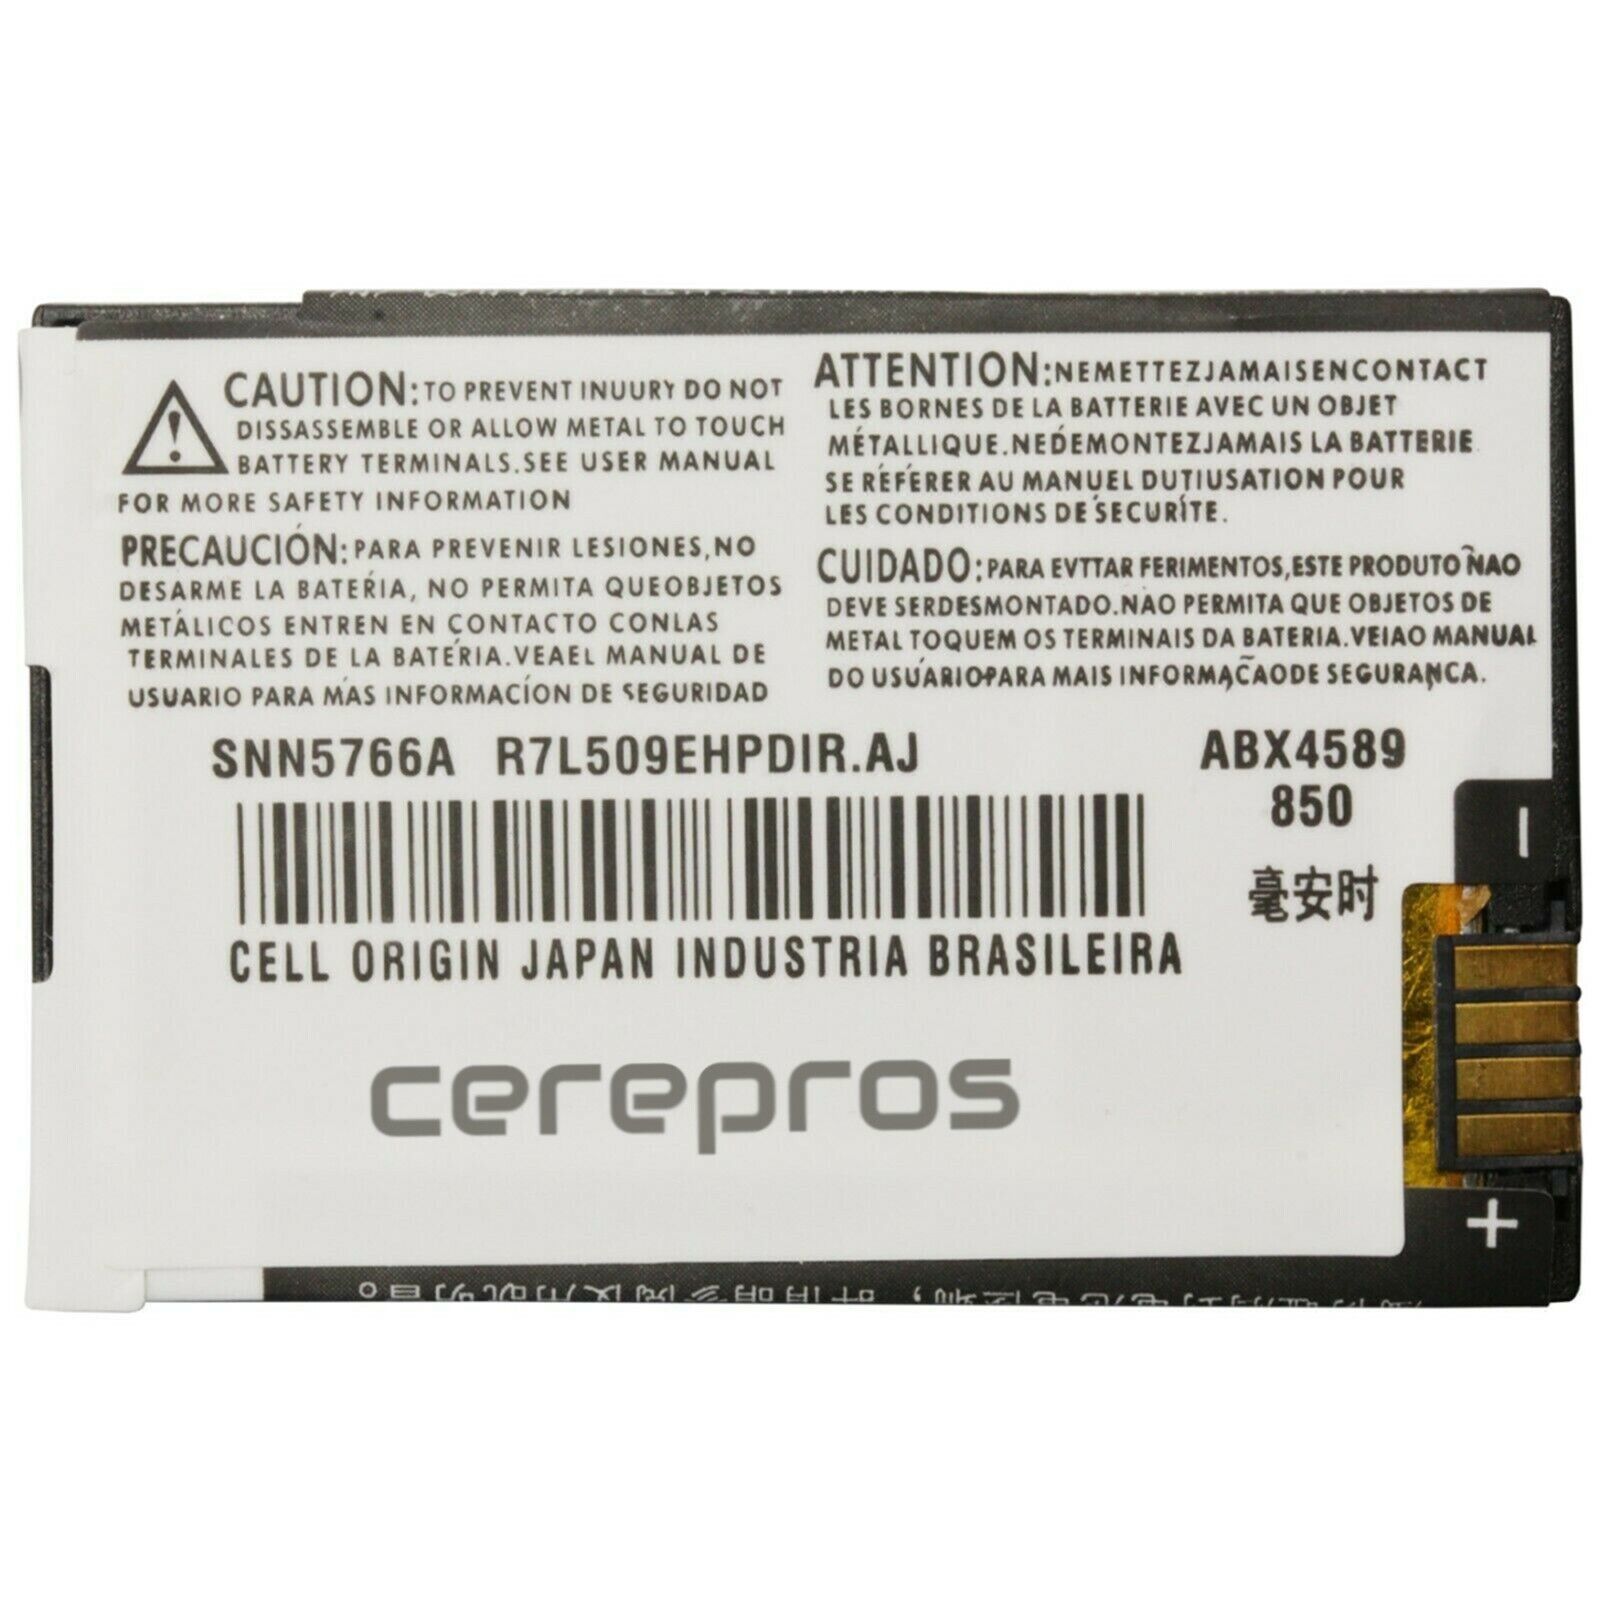 Replacement Cell Phone Battery For Motorola Bt50 Bt51 Battery Pack - $29.99